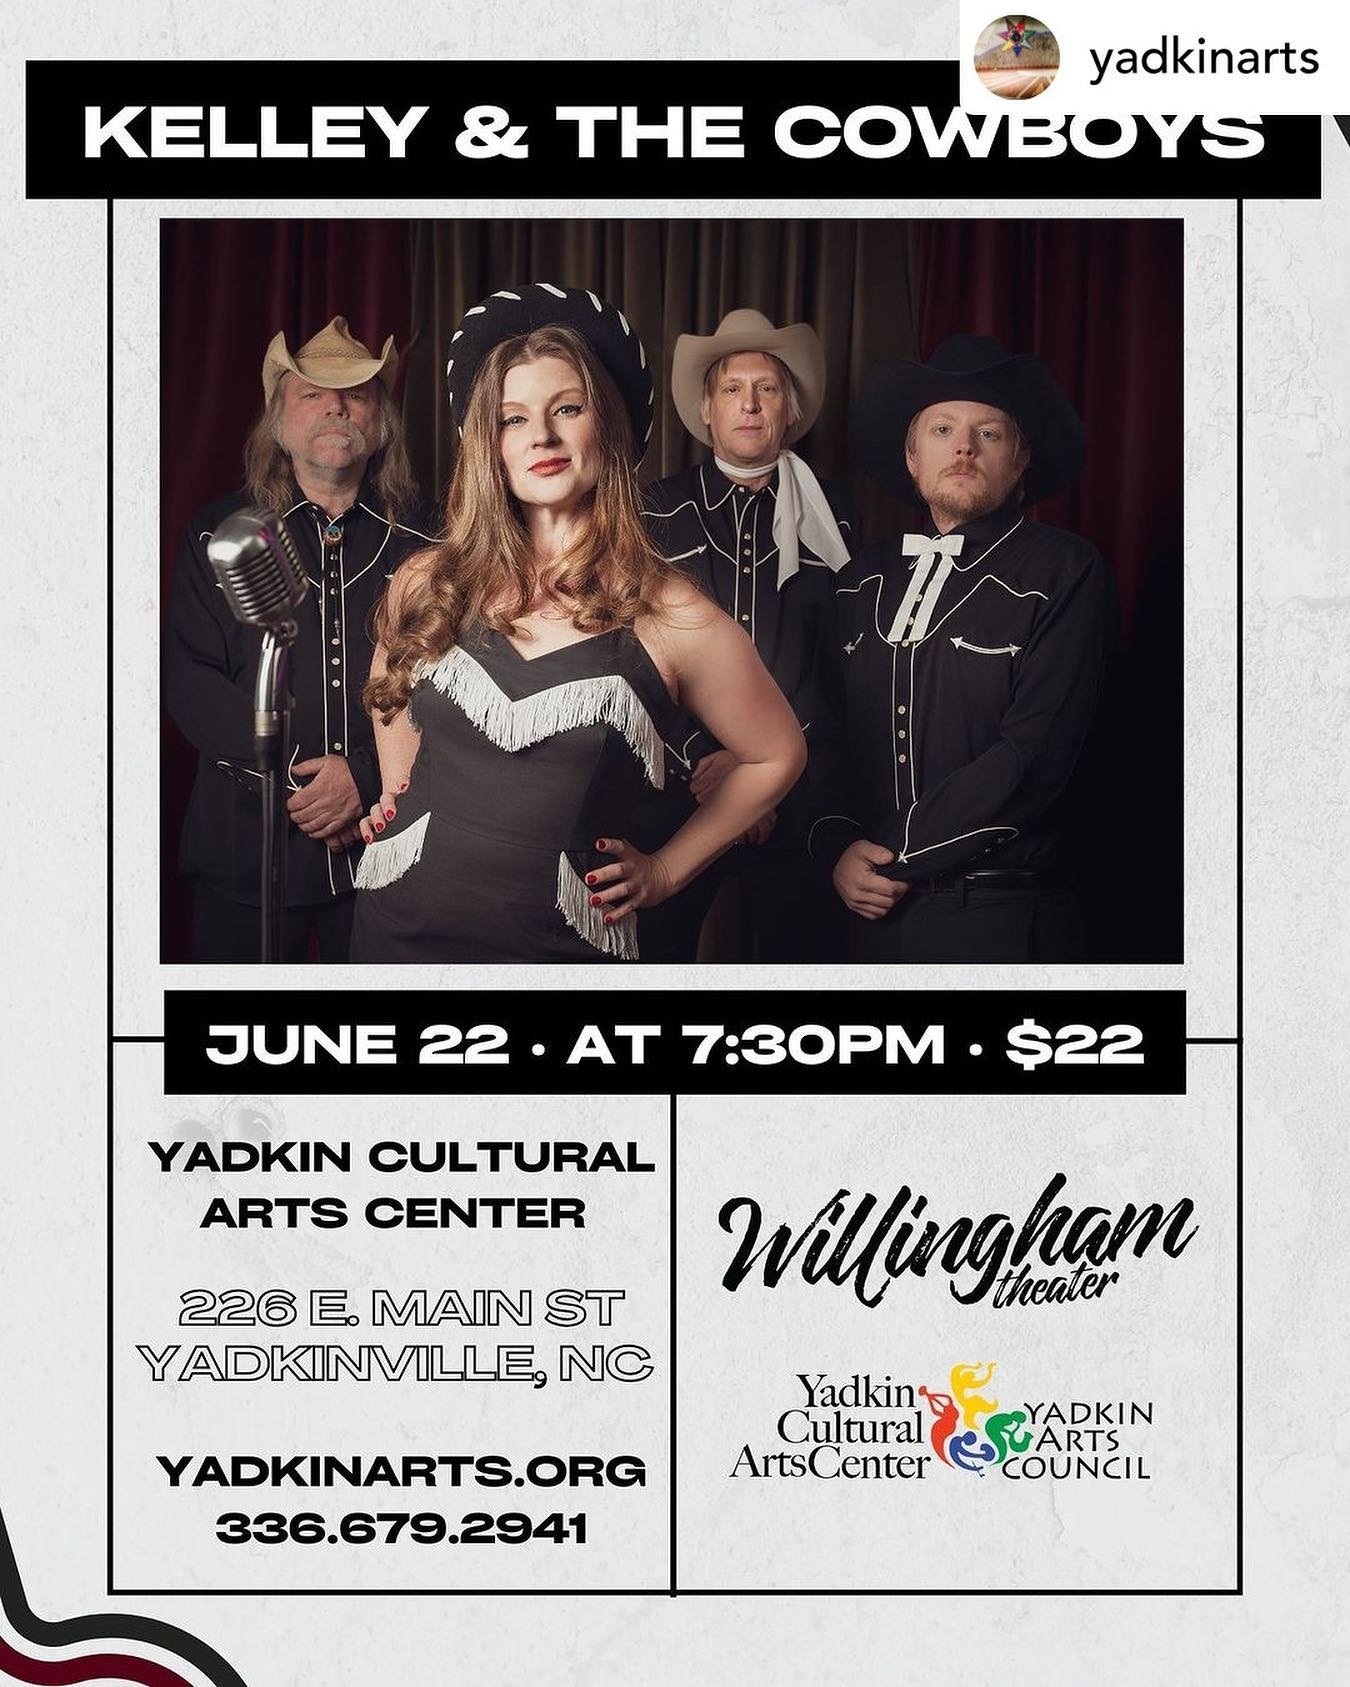 Posted @withregram &bull; @yadkinarts Next up on the Willingham Theater stage is Kelley &amp; The Cowboys on June 22 @ 7:30pm! 

You will not want to miss this! 

Get your tickets now at www.yadkinarts.org or give us a call!